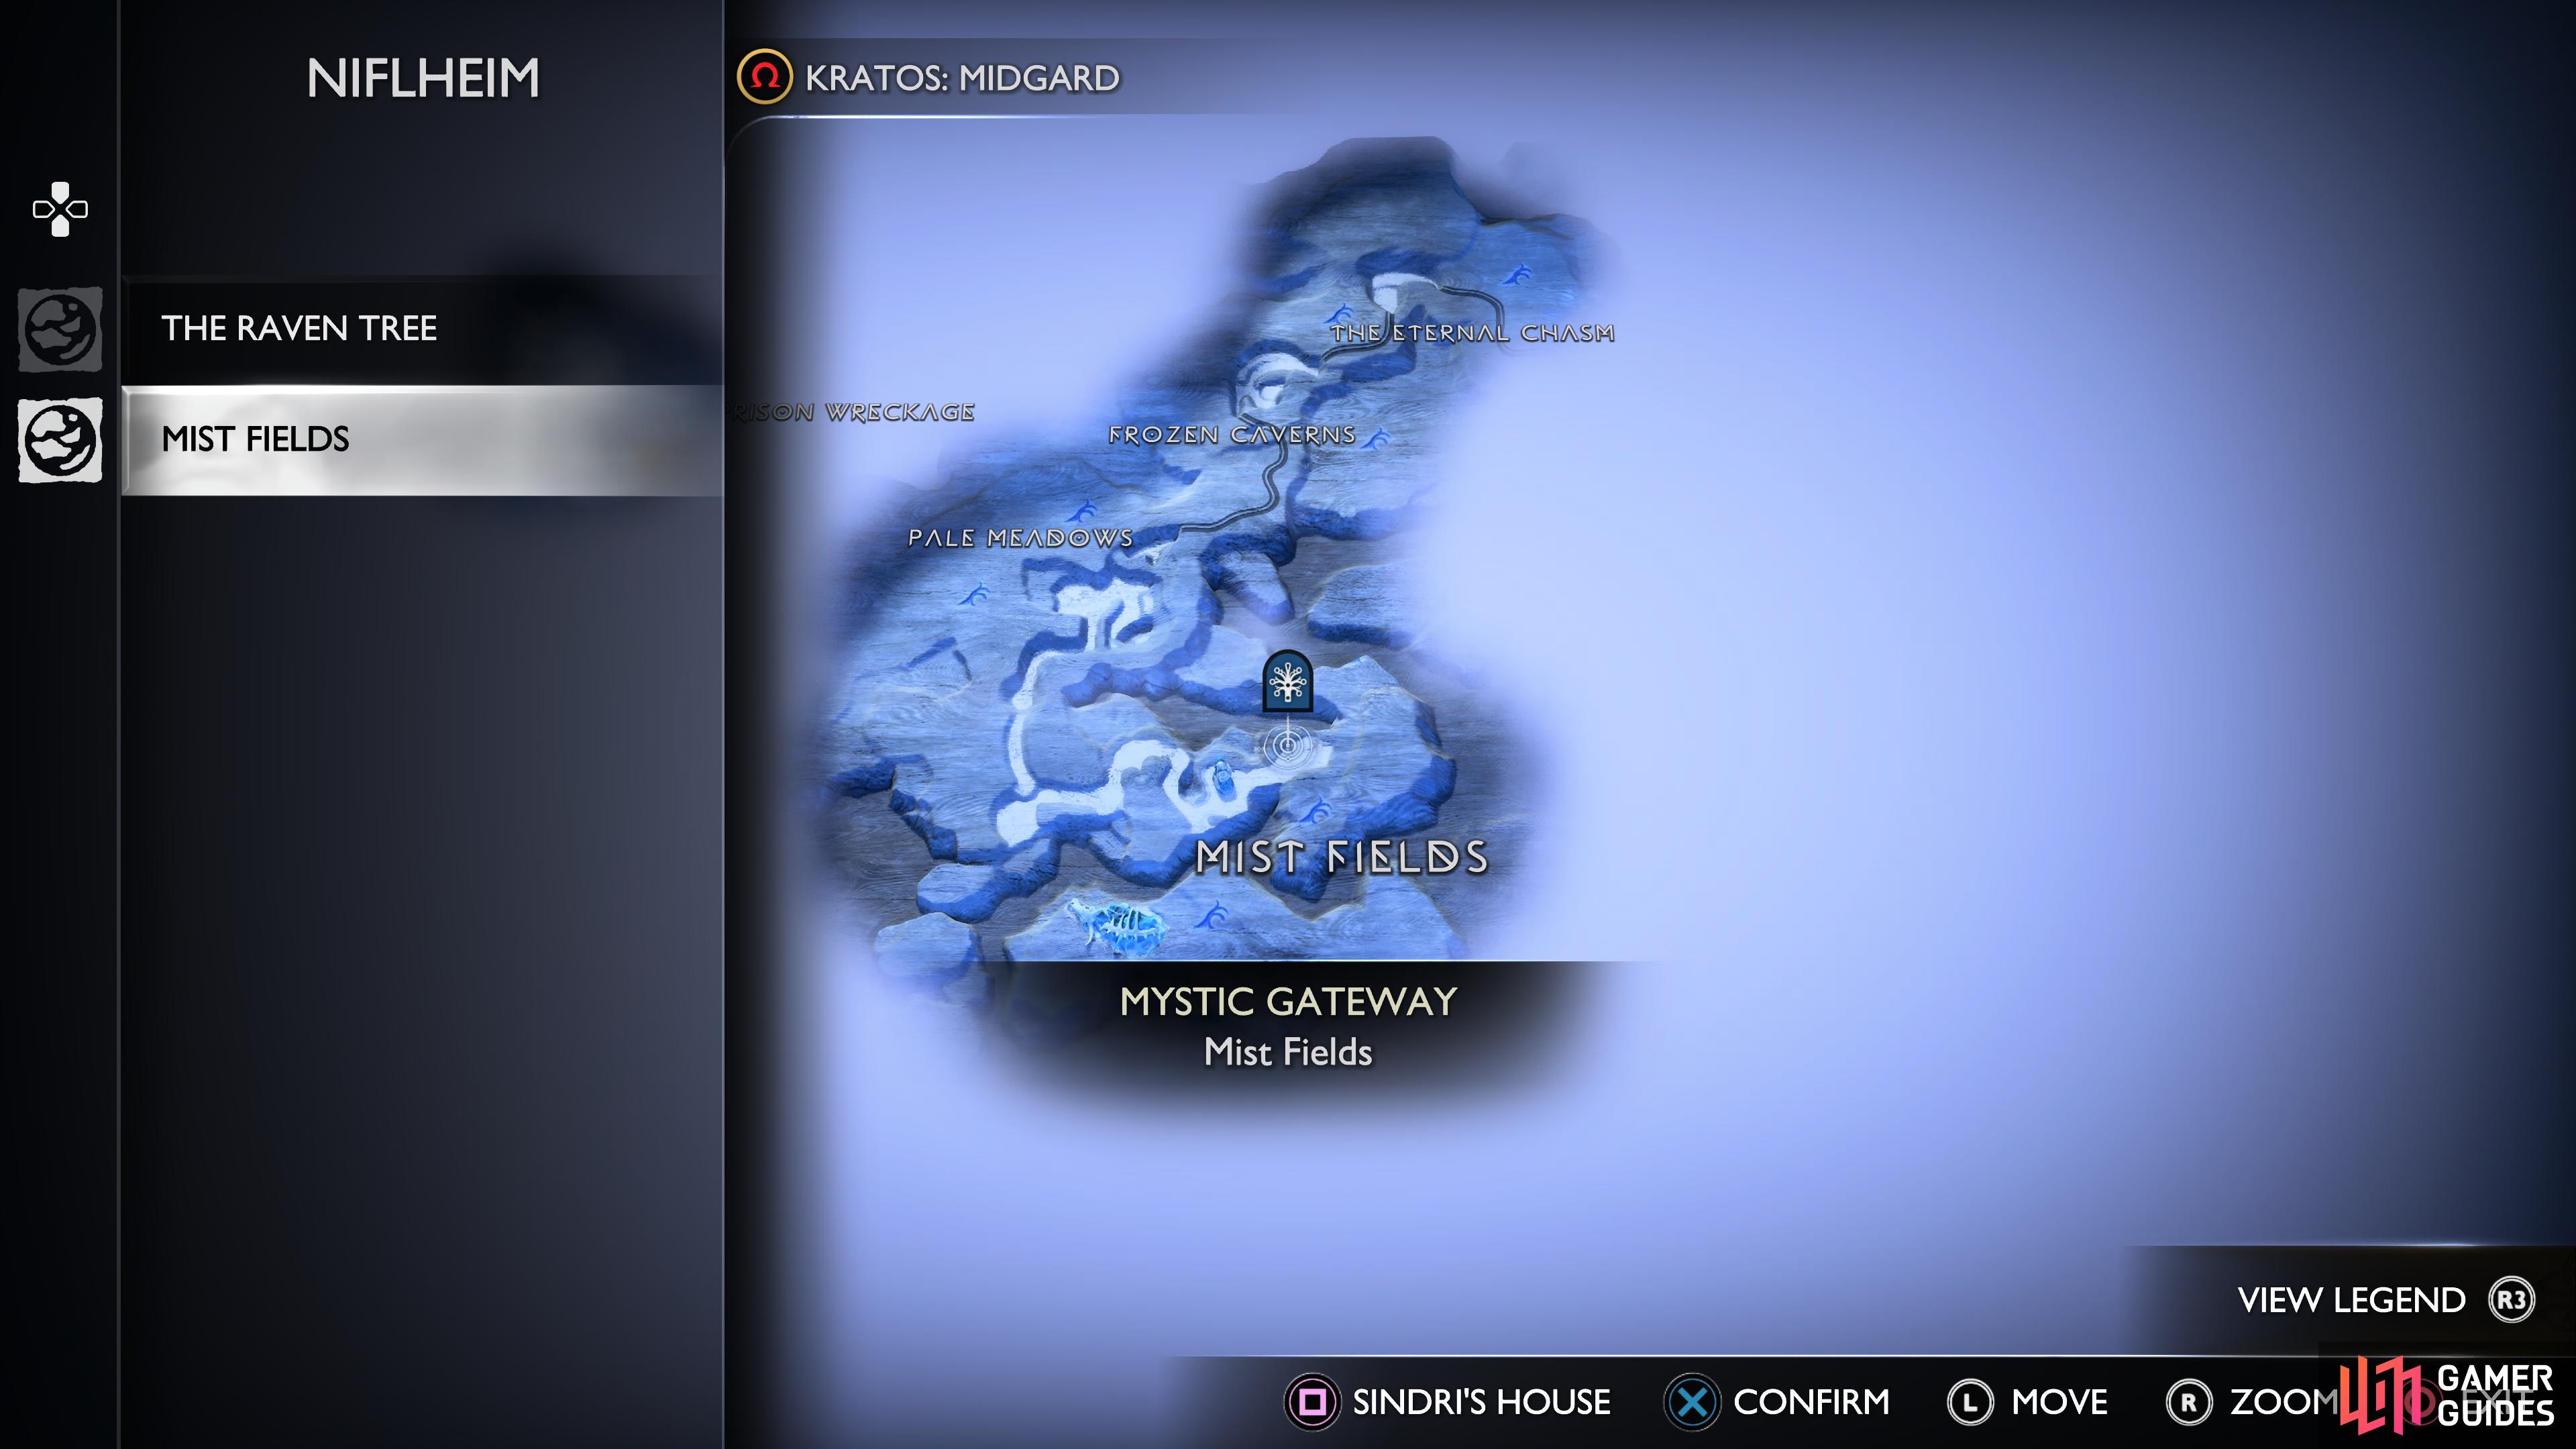 The location of the Frostfinger Flower in the southeast part of the Mist Fields of NIflheim.